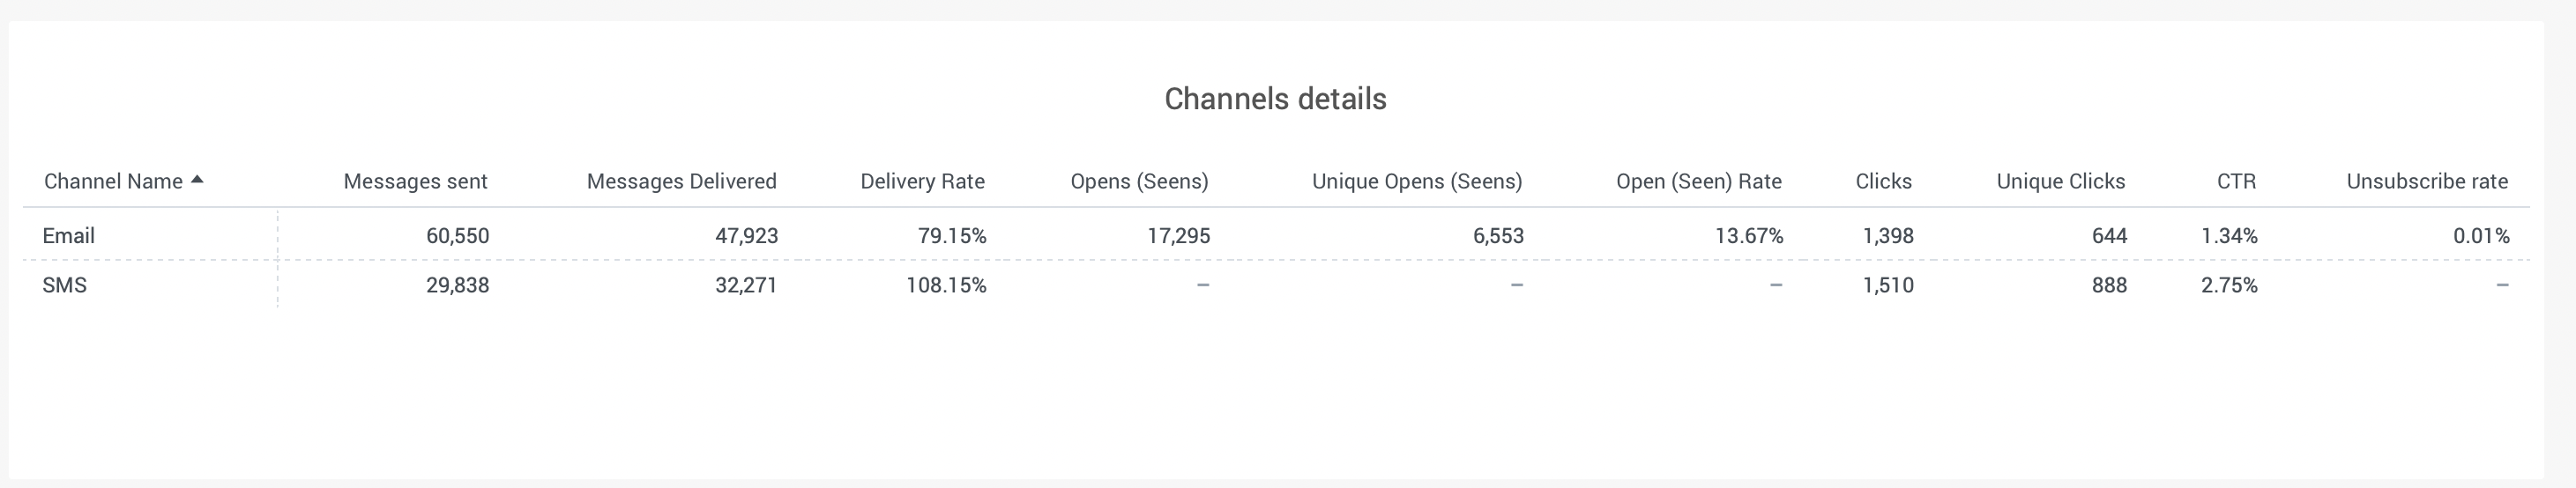 moments-analytics-channel-details